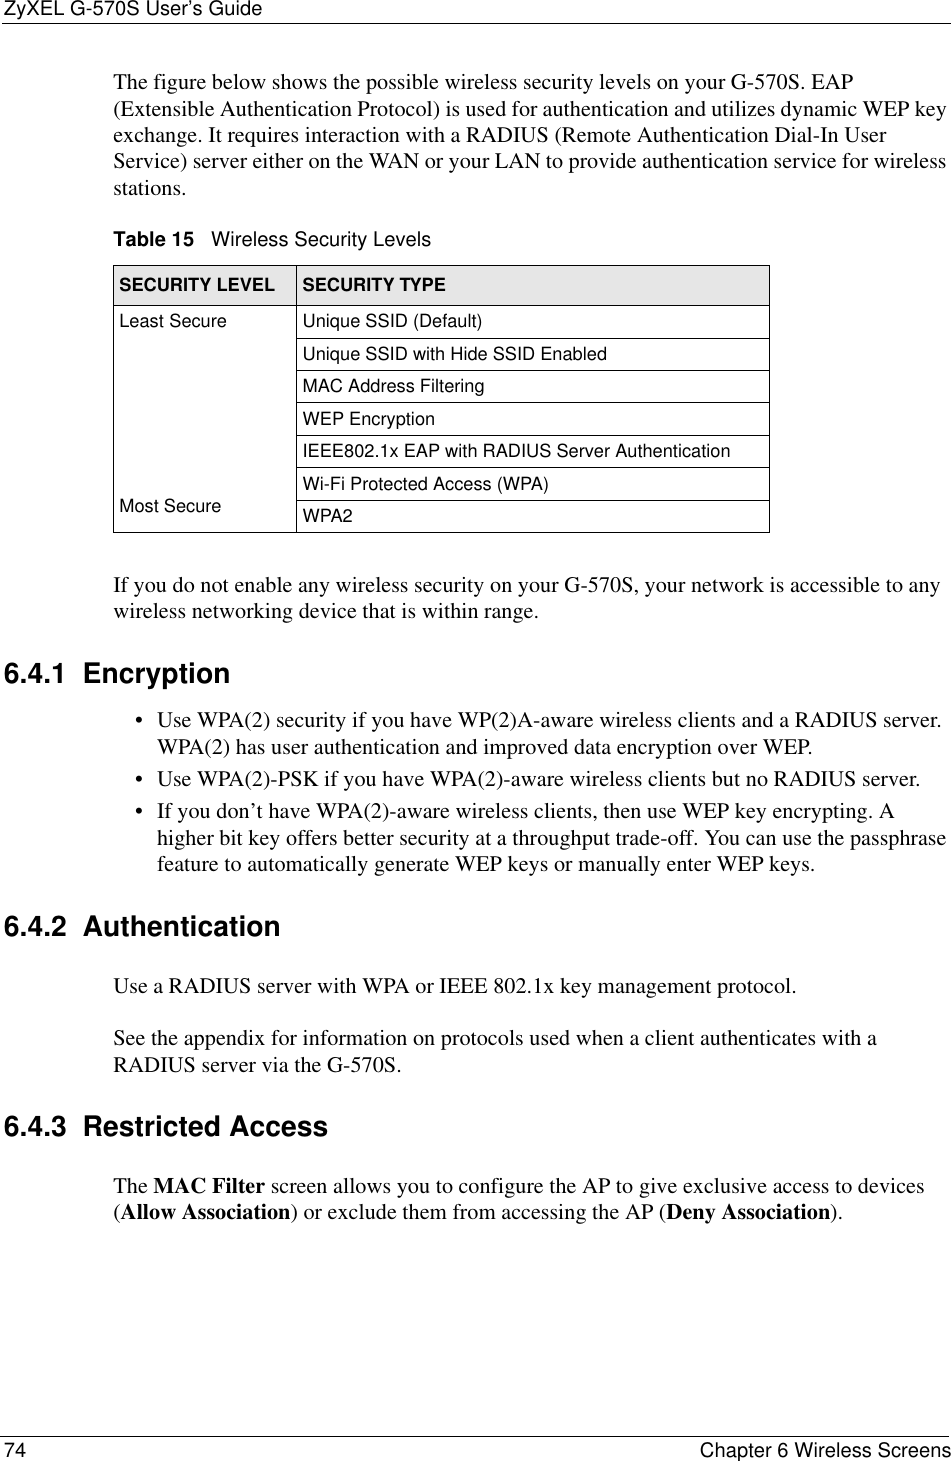 ZyXEL G-570S User’s Guide74 Chapter 6 Wireless ScreensThe figure below shows the possible wireless security levels on your G-570S. EAP (Extensible Authentication Protocol) is used for authentication and utilizes dynamic WEP key exchange. It requires interaction with a RADIUS (Remote Authentication Dial-In User Service) server either on the WAN or your LAN to provide authentication service for wireless stations.If you do not enable any wireless security on your G-570S, your network is accessible to any wireless networking device that is within range.6.4.1  Encryption• Use WPA(2) security if you have WP(2)A-aware wireless clients and a RADIUS server. WPA(2) has user authentication and improved data encryption over WEP.• Use WPA(2)-PSK if you have WPA(2)-aware wireless clients but no RADIUS server.• If you don’t have WPA(2)-aware wireless clients, then use WEP key encrypting. A higher bit key offers better security at a throughput trade-off. You can use the passphrase feature to automatically generate WEP keys or manually enter WEP keys.6.4.2  AuthenticationUse a RADIUS server with WPA or IEEE 802.1x key management protocol. See the appendix for information on protocols used when a client authenticates with a RADIUS server via the G-570S.6.4.3  Restricted AccessThe MAC Filter screen allows you to configure the AP to give exclusive access to devices (Allow Association) or exclude them from accessing the AP (Deny Association).Table 15   Wireless Security LevelsSECURITY LEVEL SECURITY TYPEL e a s t         S e c u r e                                                                                        Most SecureUnique SSID (Default)Unique SSID with Hide SSID EnabledMAC Address FilteringWEP EncryptionIEEE802.1x EAP with RADIUS Server AuthenticationWi-Fi Protected Access (WPA)WPA2